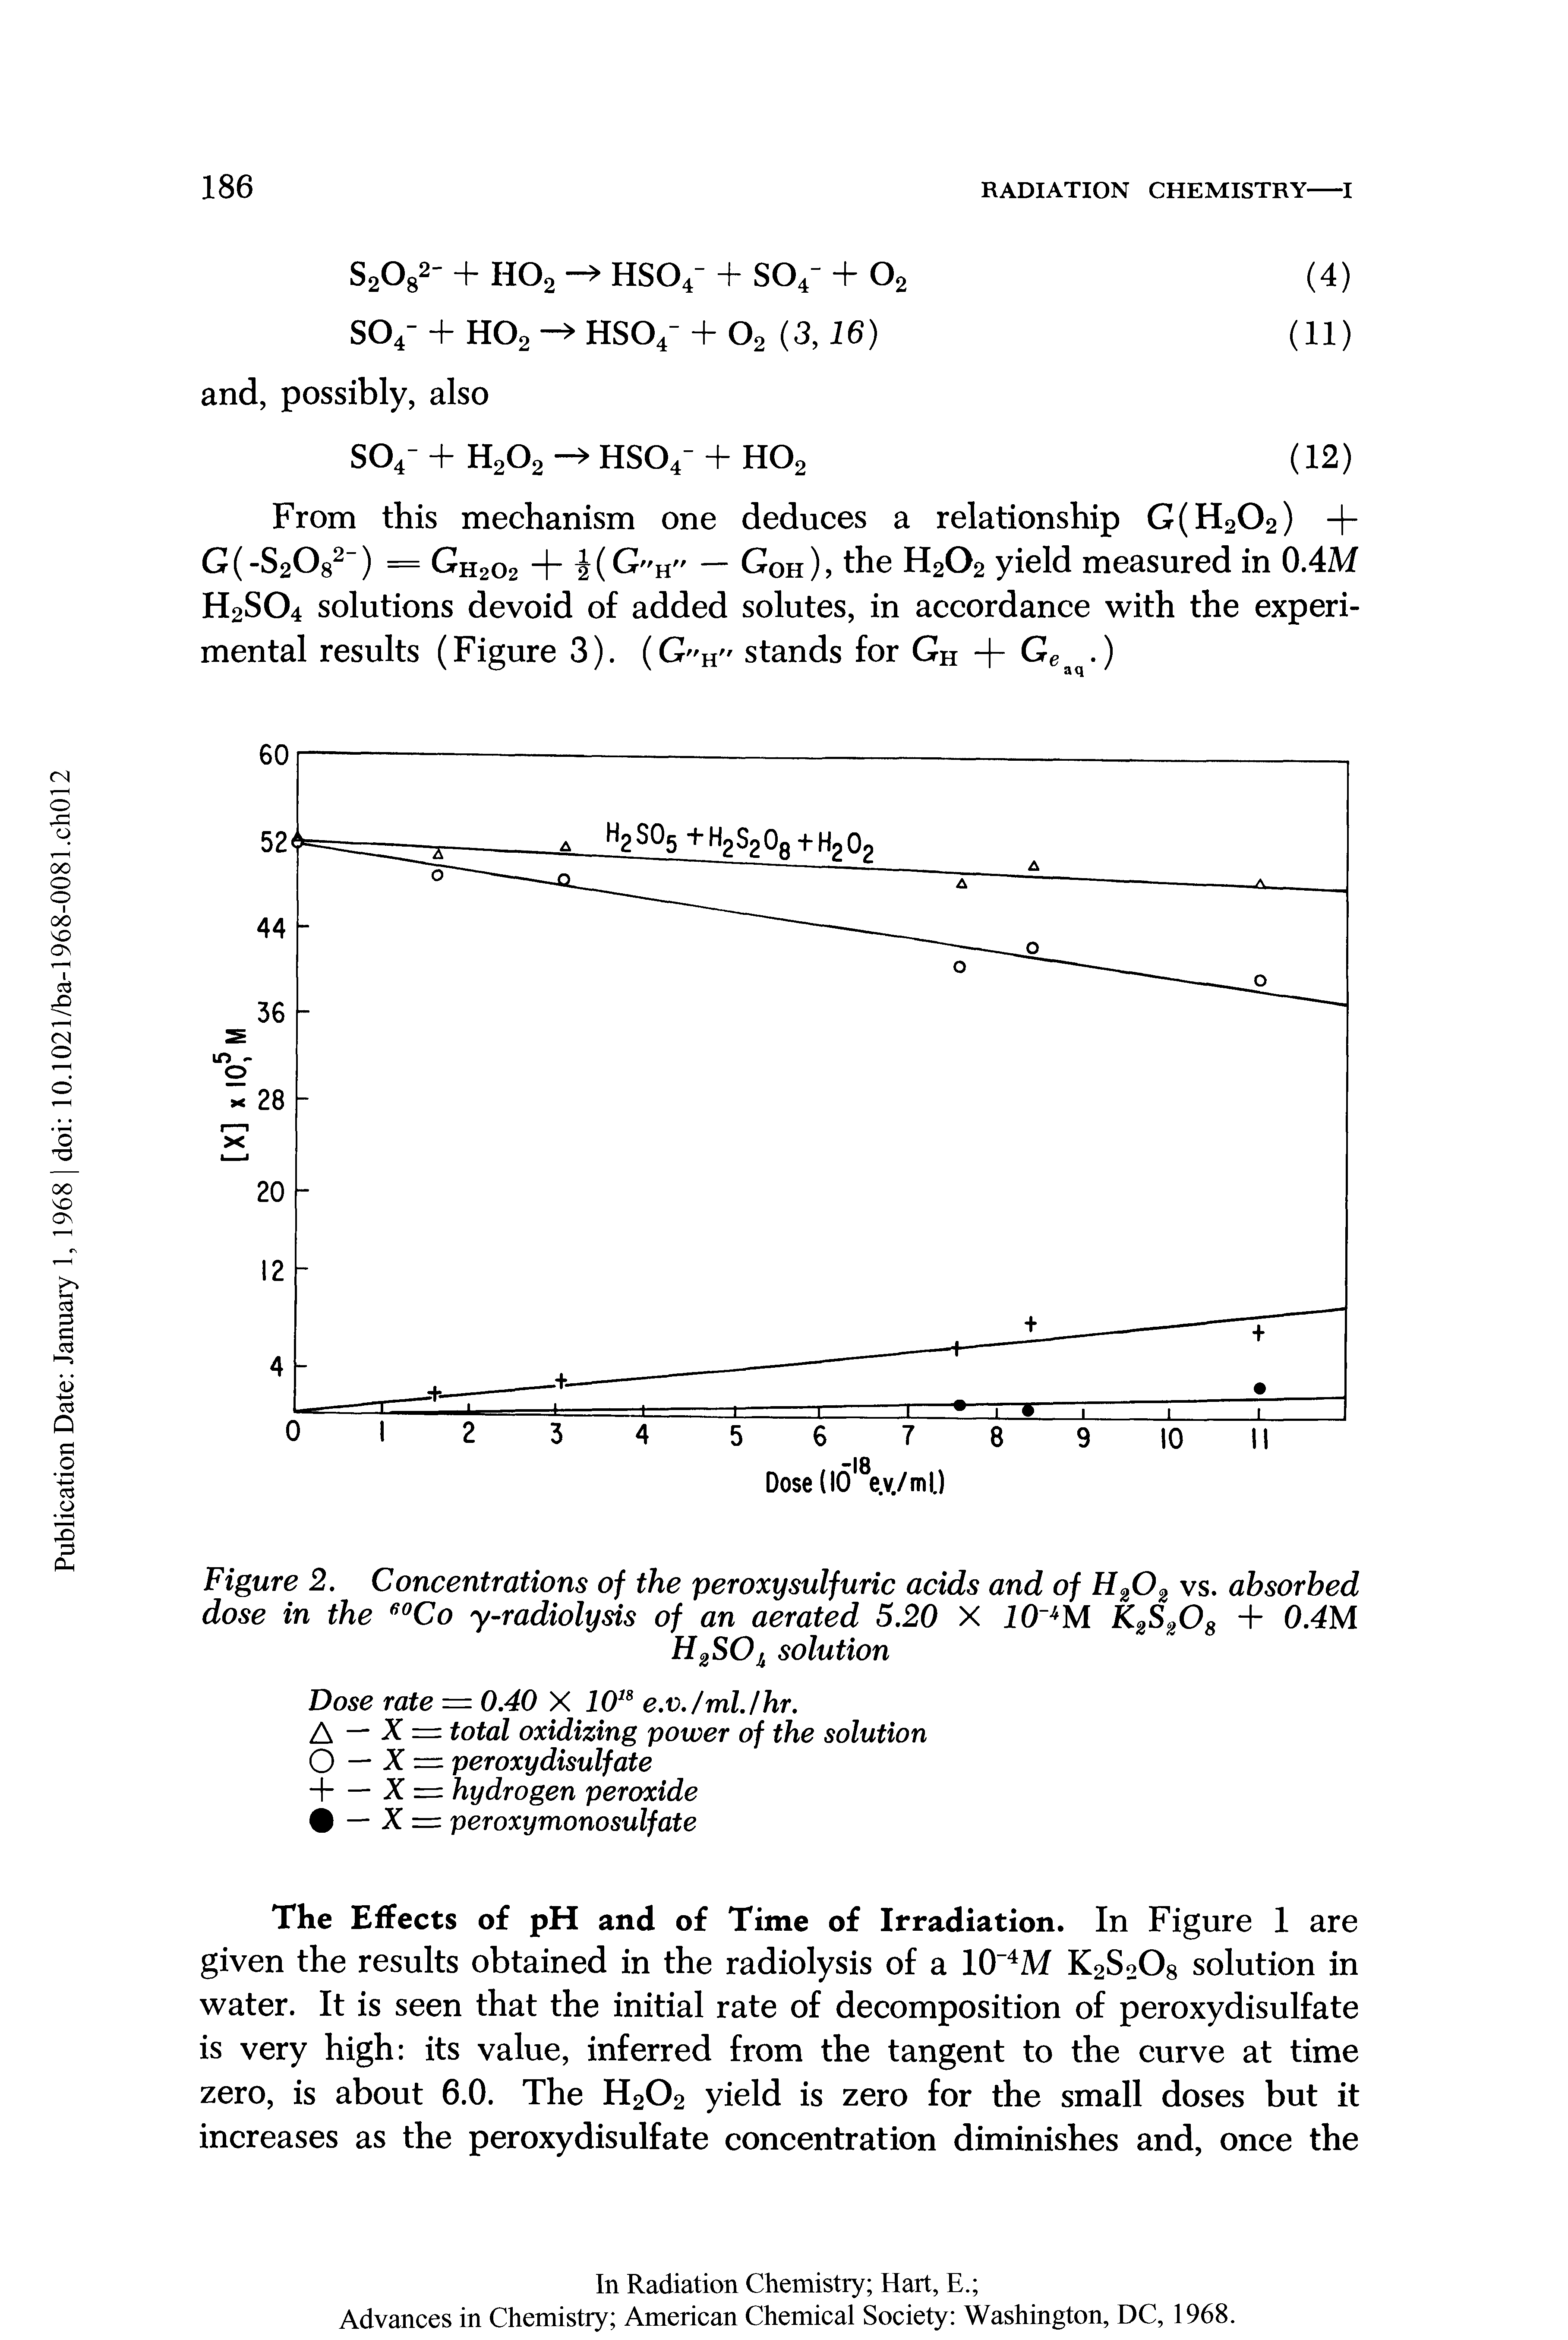 Figure 2. Concentrations of the peroxysulfuric acids and of H202 vs. absorbed dose in the 60Co y-radiolysis of an aerated 5.20 X 10 uM K2S208 + 0.4M...